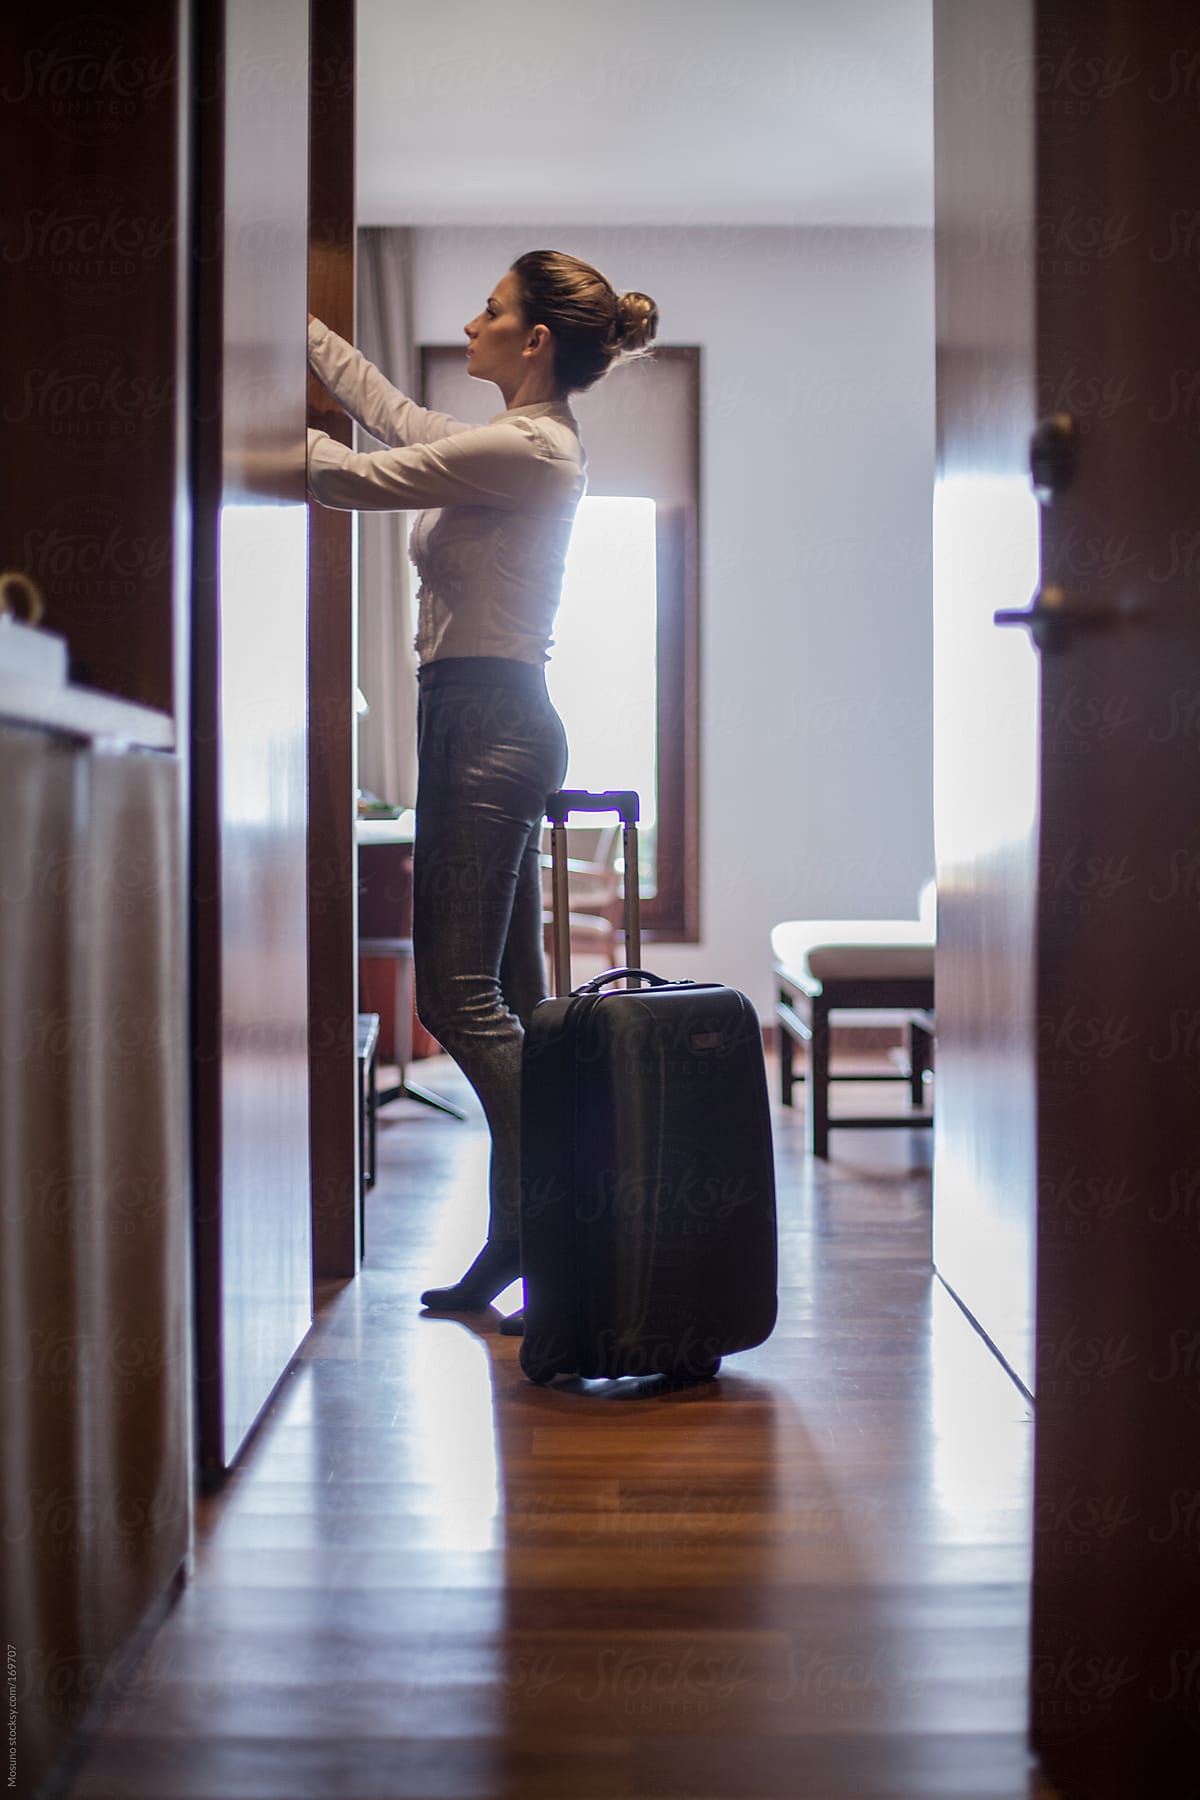 Woman Unpacking in a Hotel Room